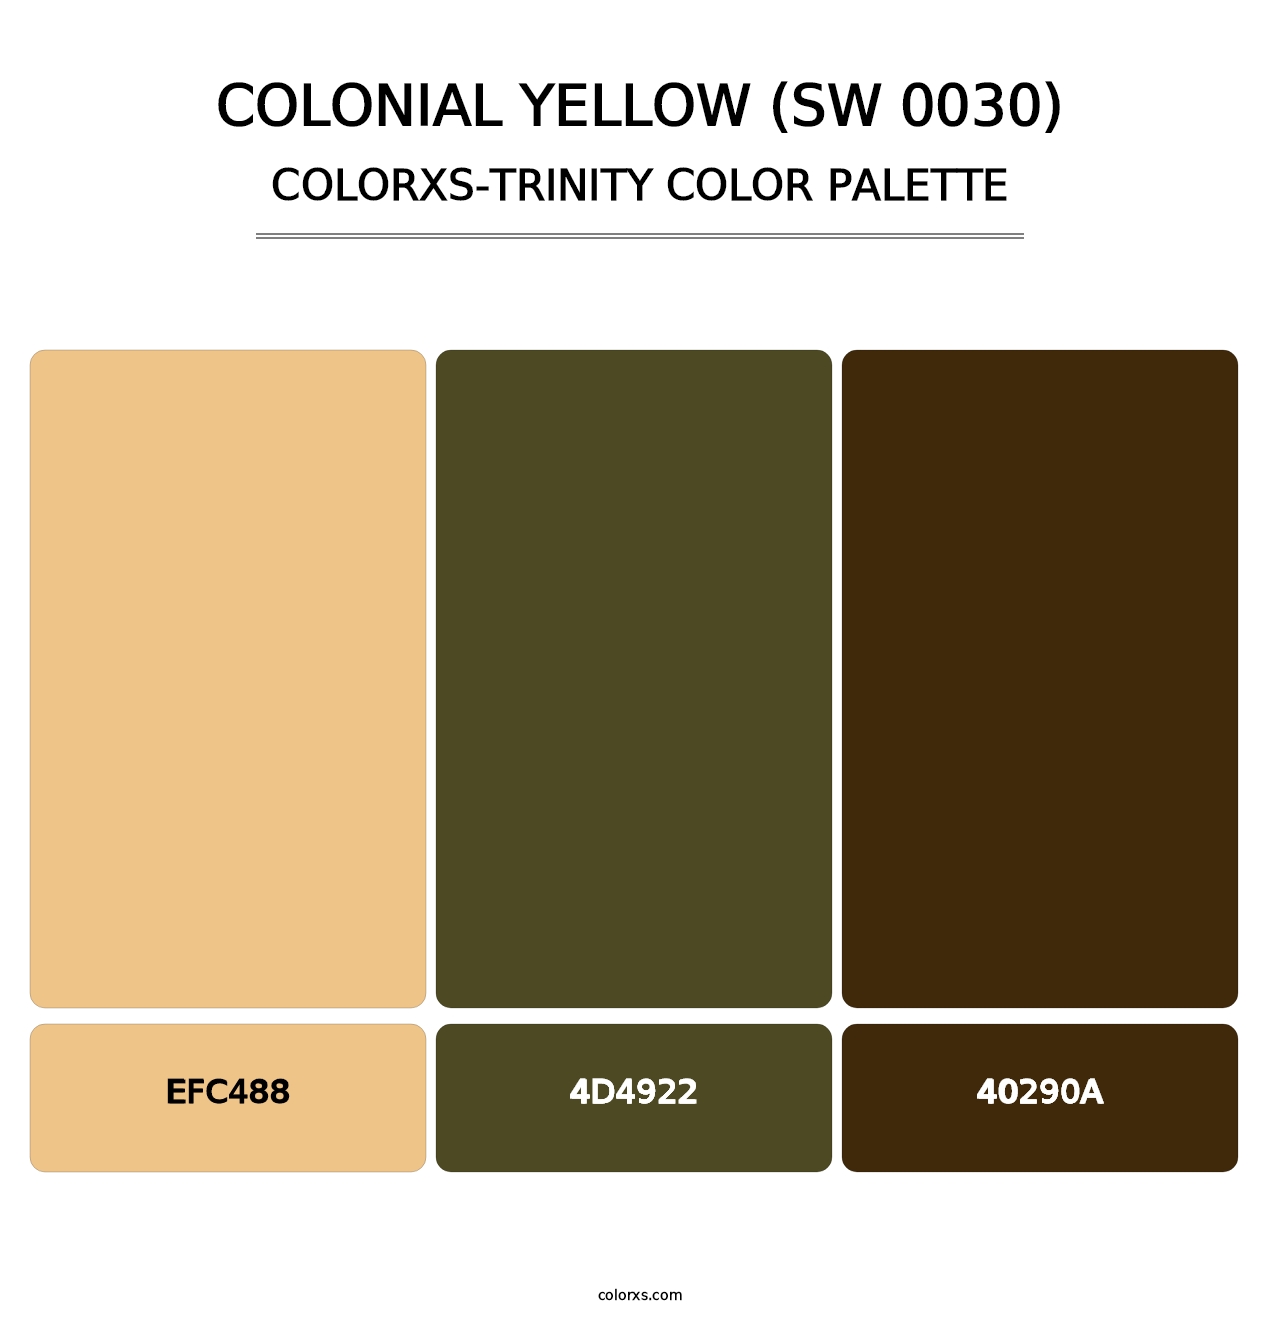 Colonial Yellow (SW 0030) - Colorxs Trinity Palette